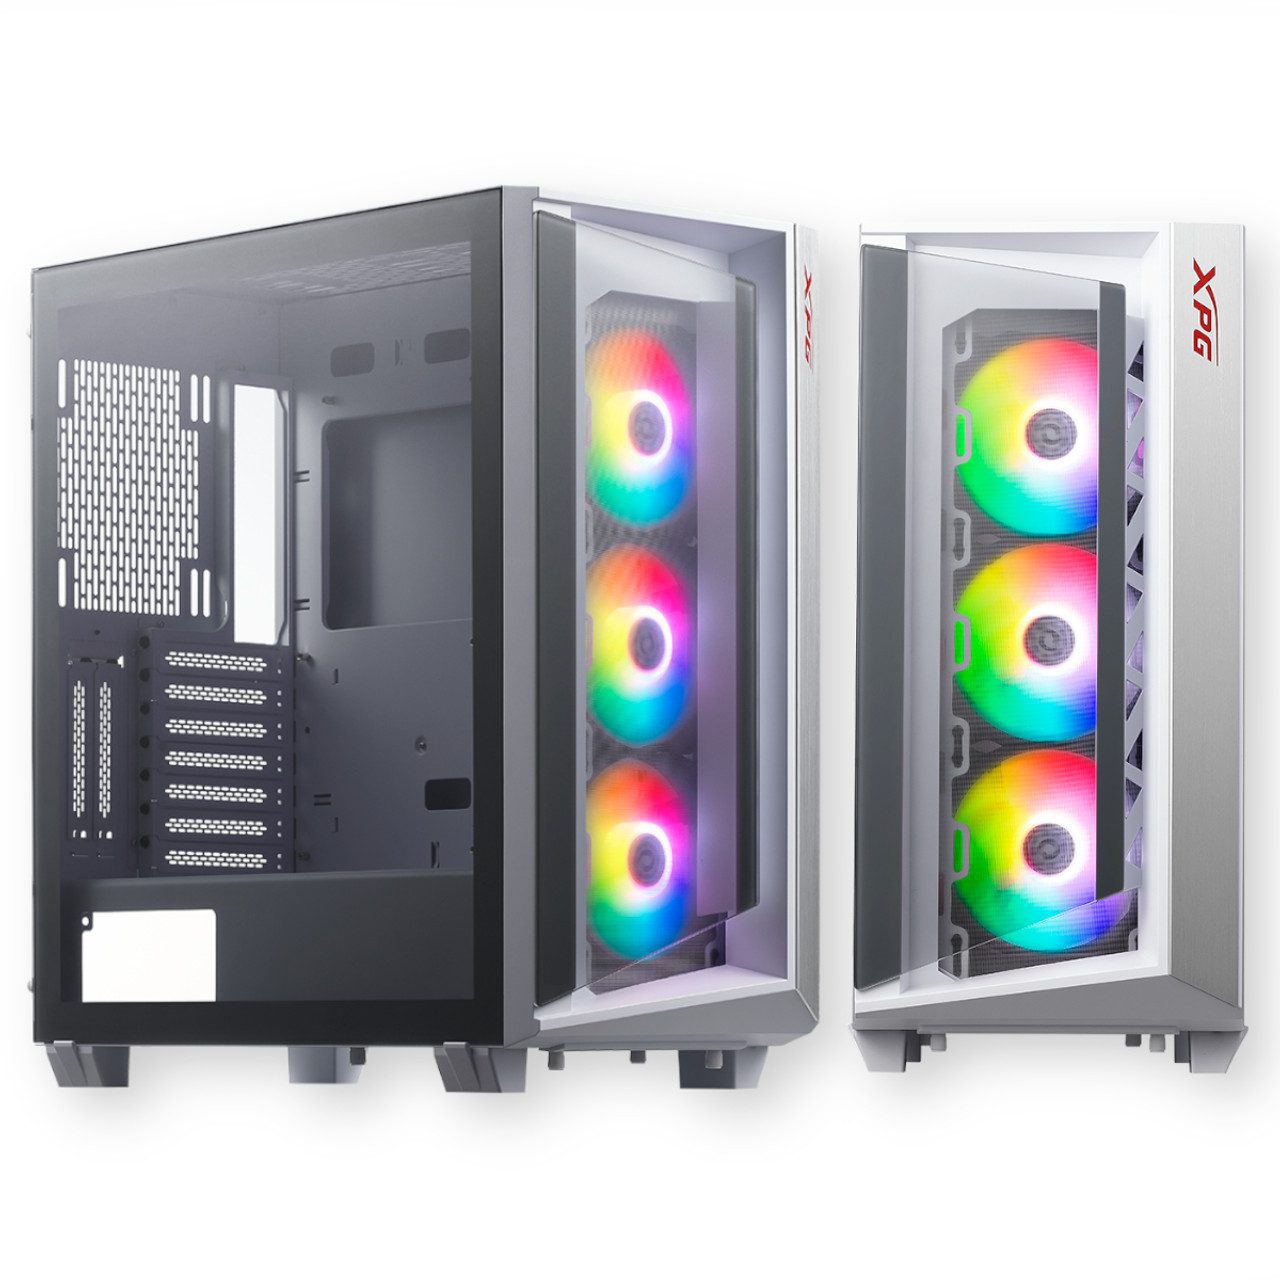 XPG Cruiserst Tempered Glass Mid-Tower Case Includes 3 ARGB Fans